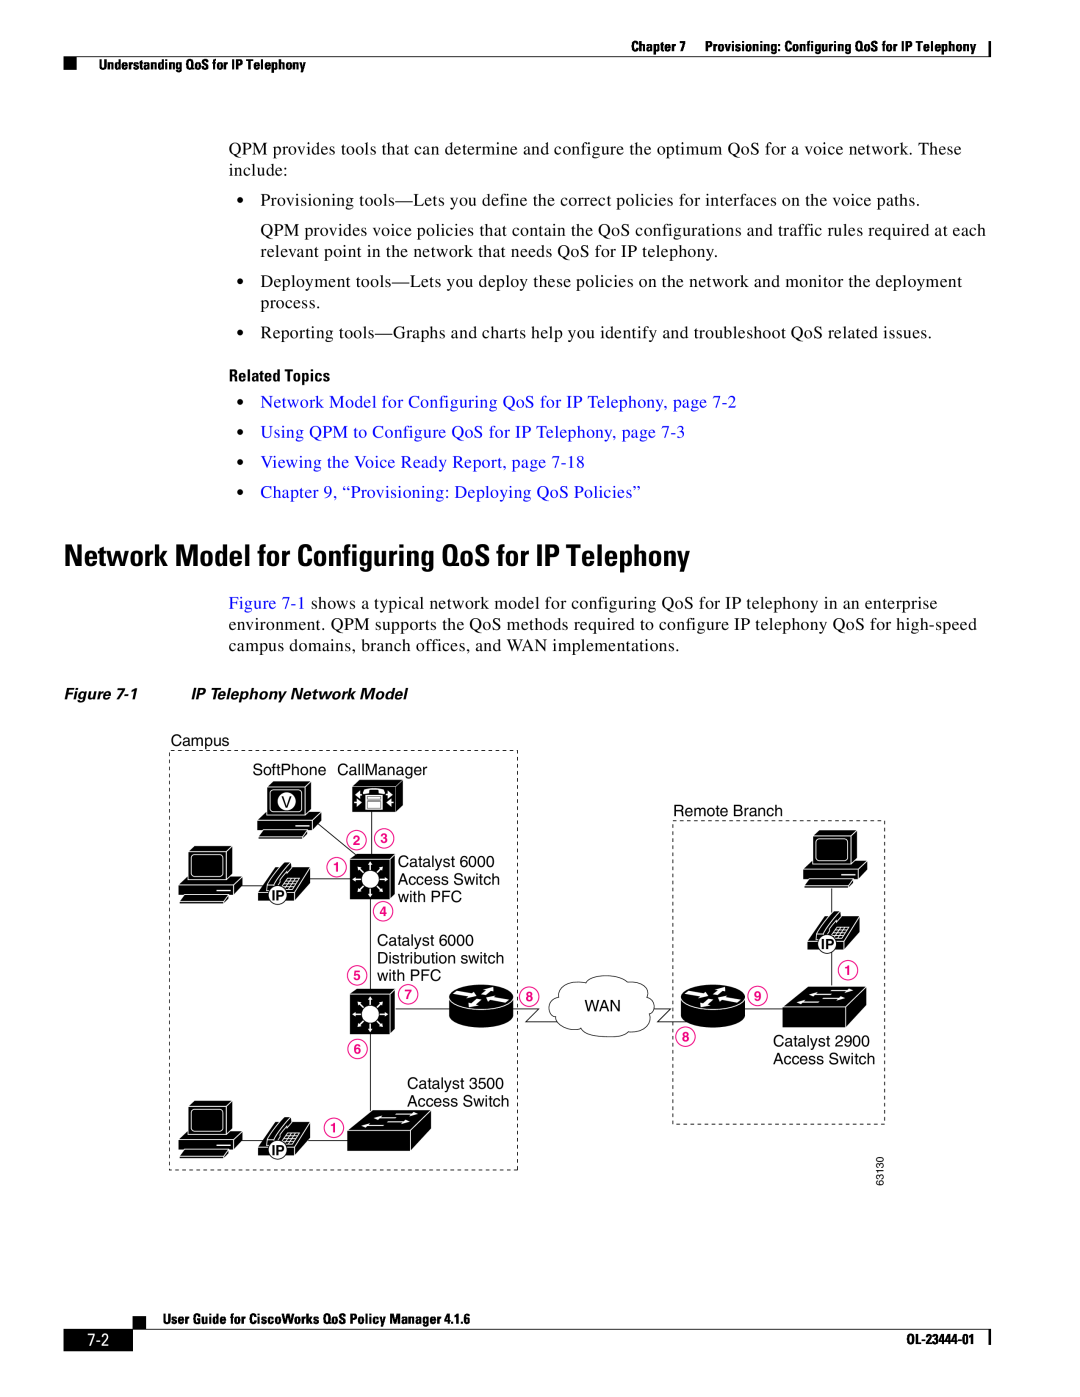 Cisco Systems 416 Network Model for Configuring QoS for IP Telephony, Related Topics, Viewing the Voice Ready Report, page 